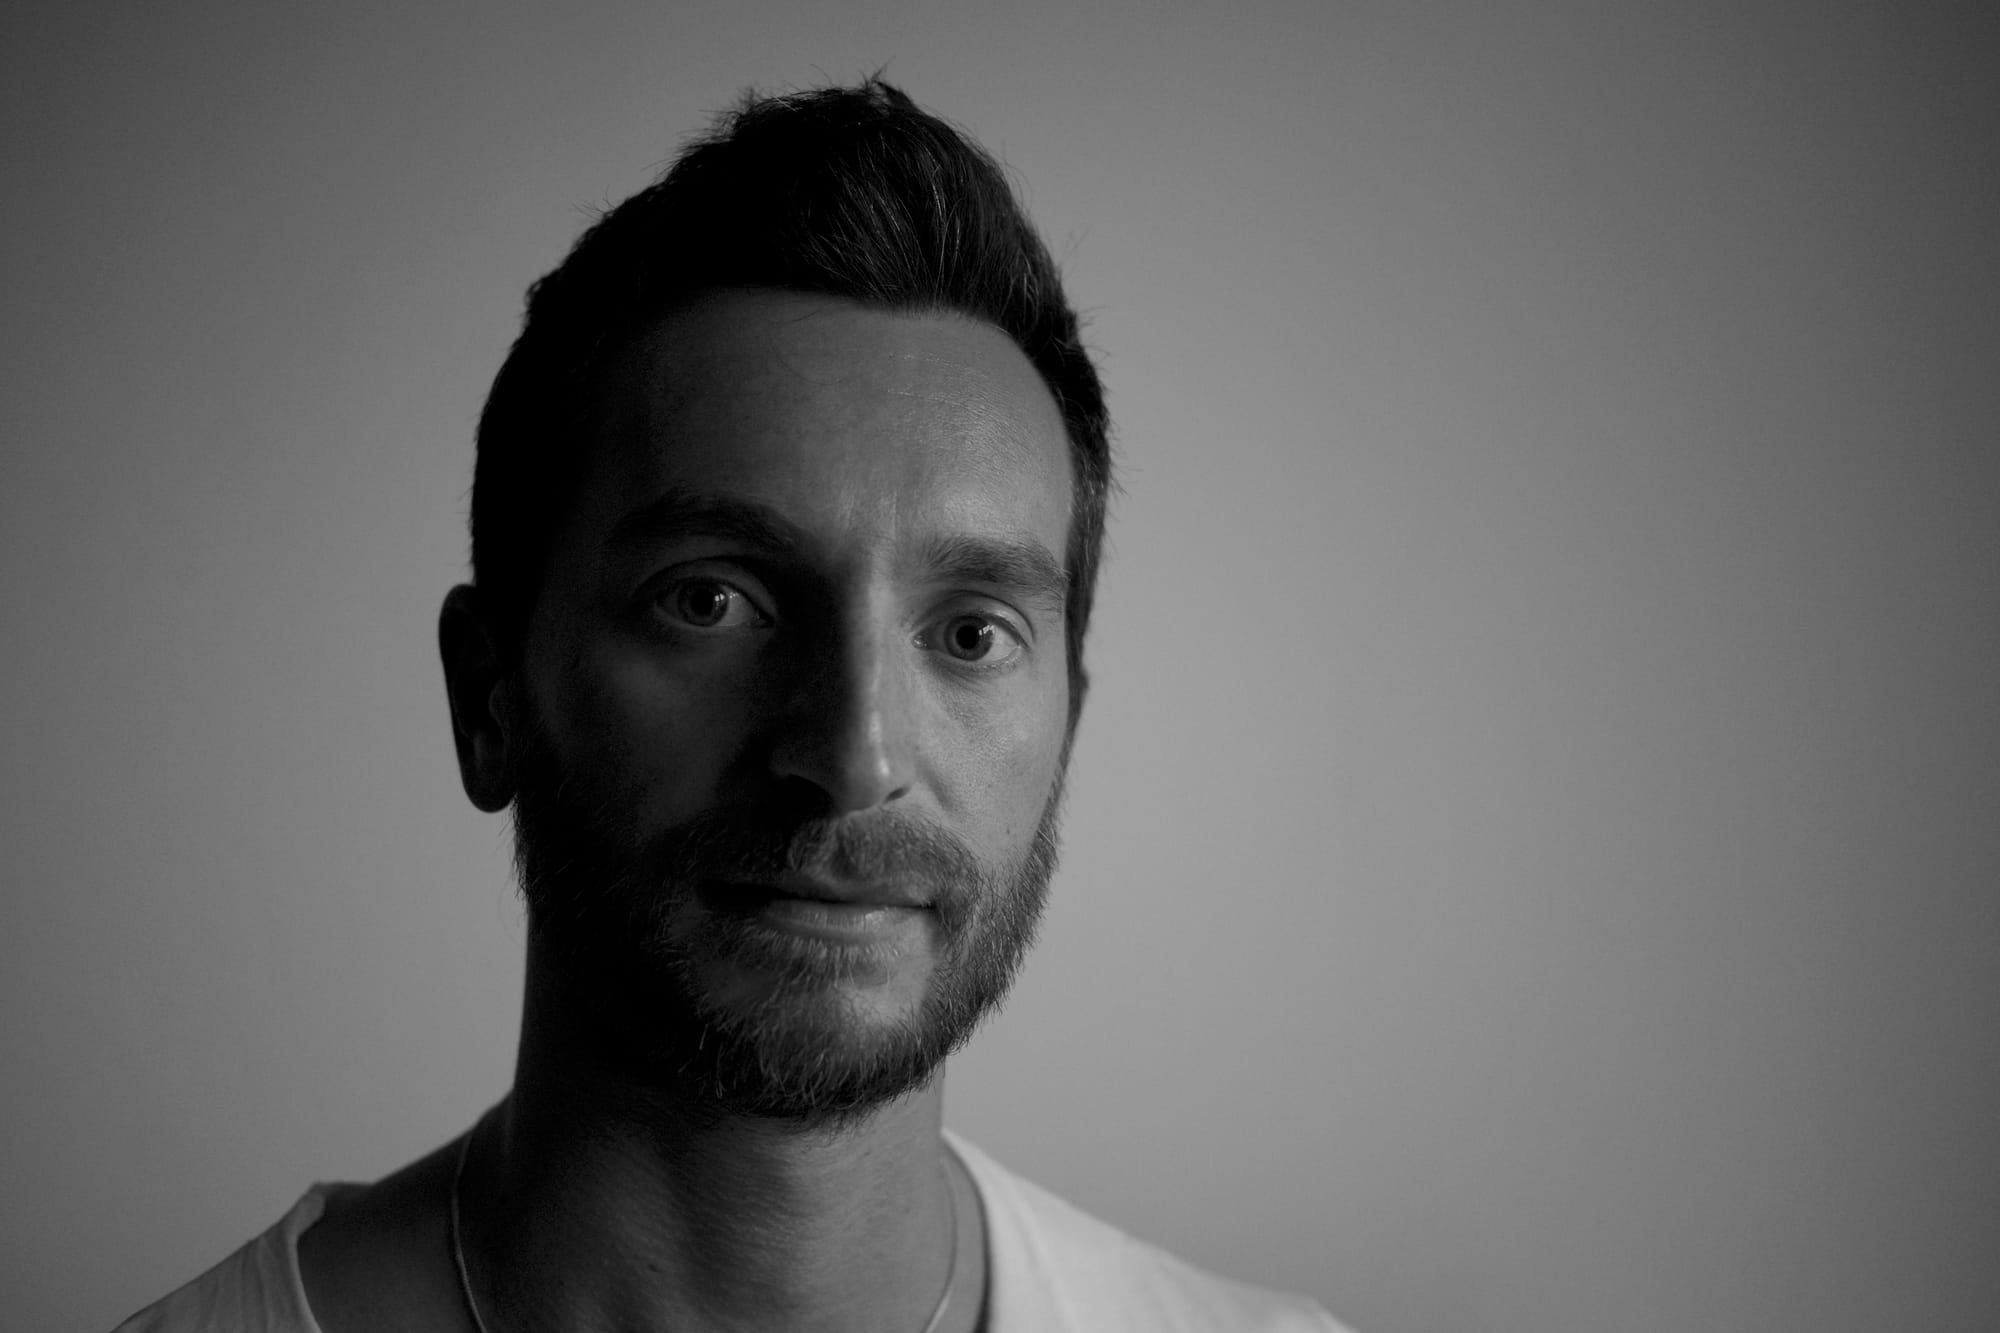 Italian producer and DJ INVE releases playlist for his next show.